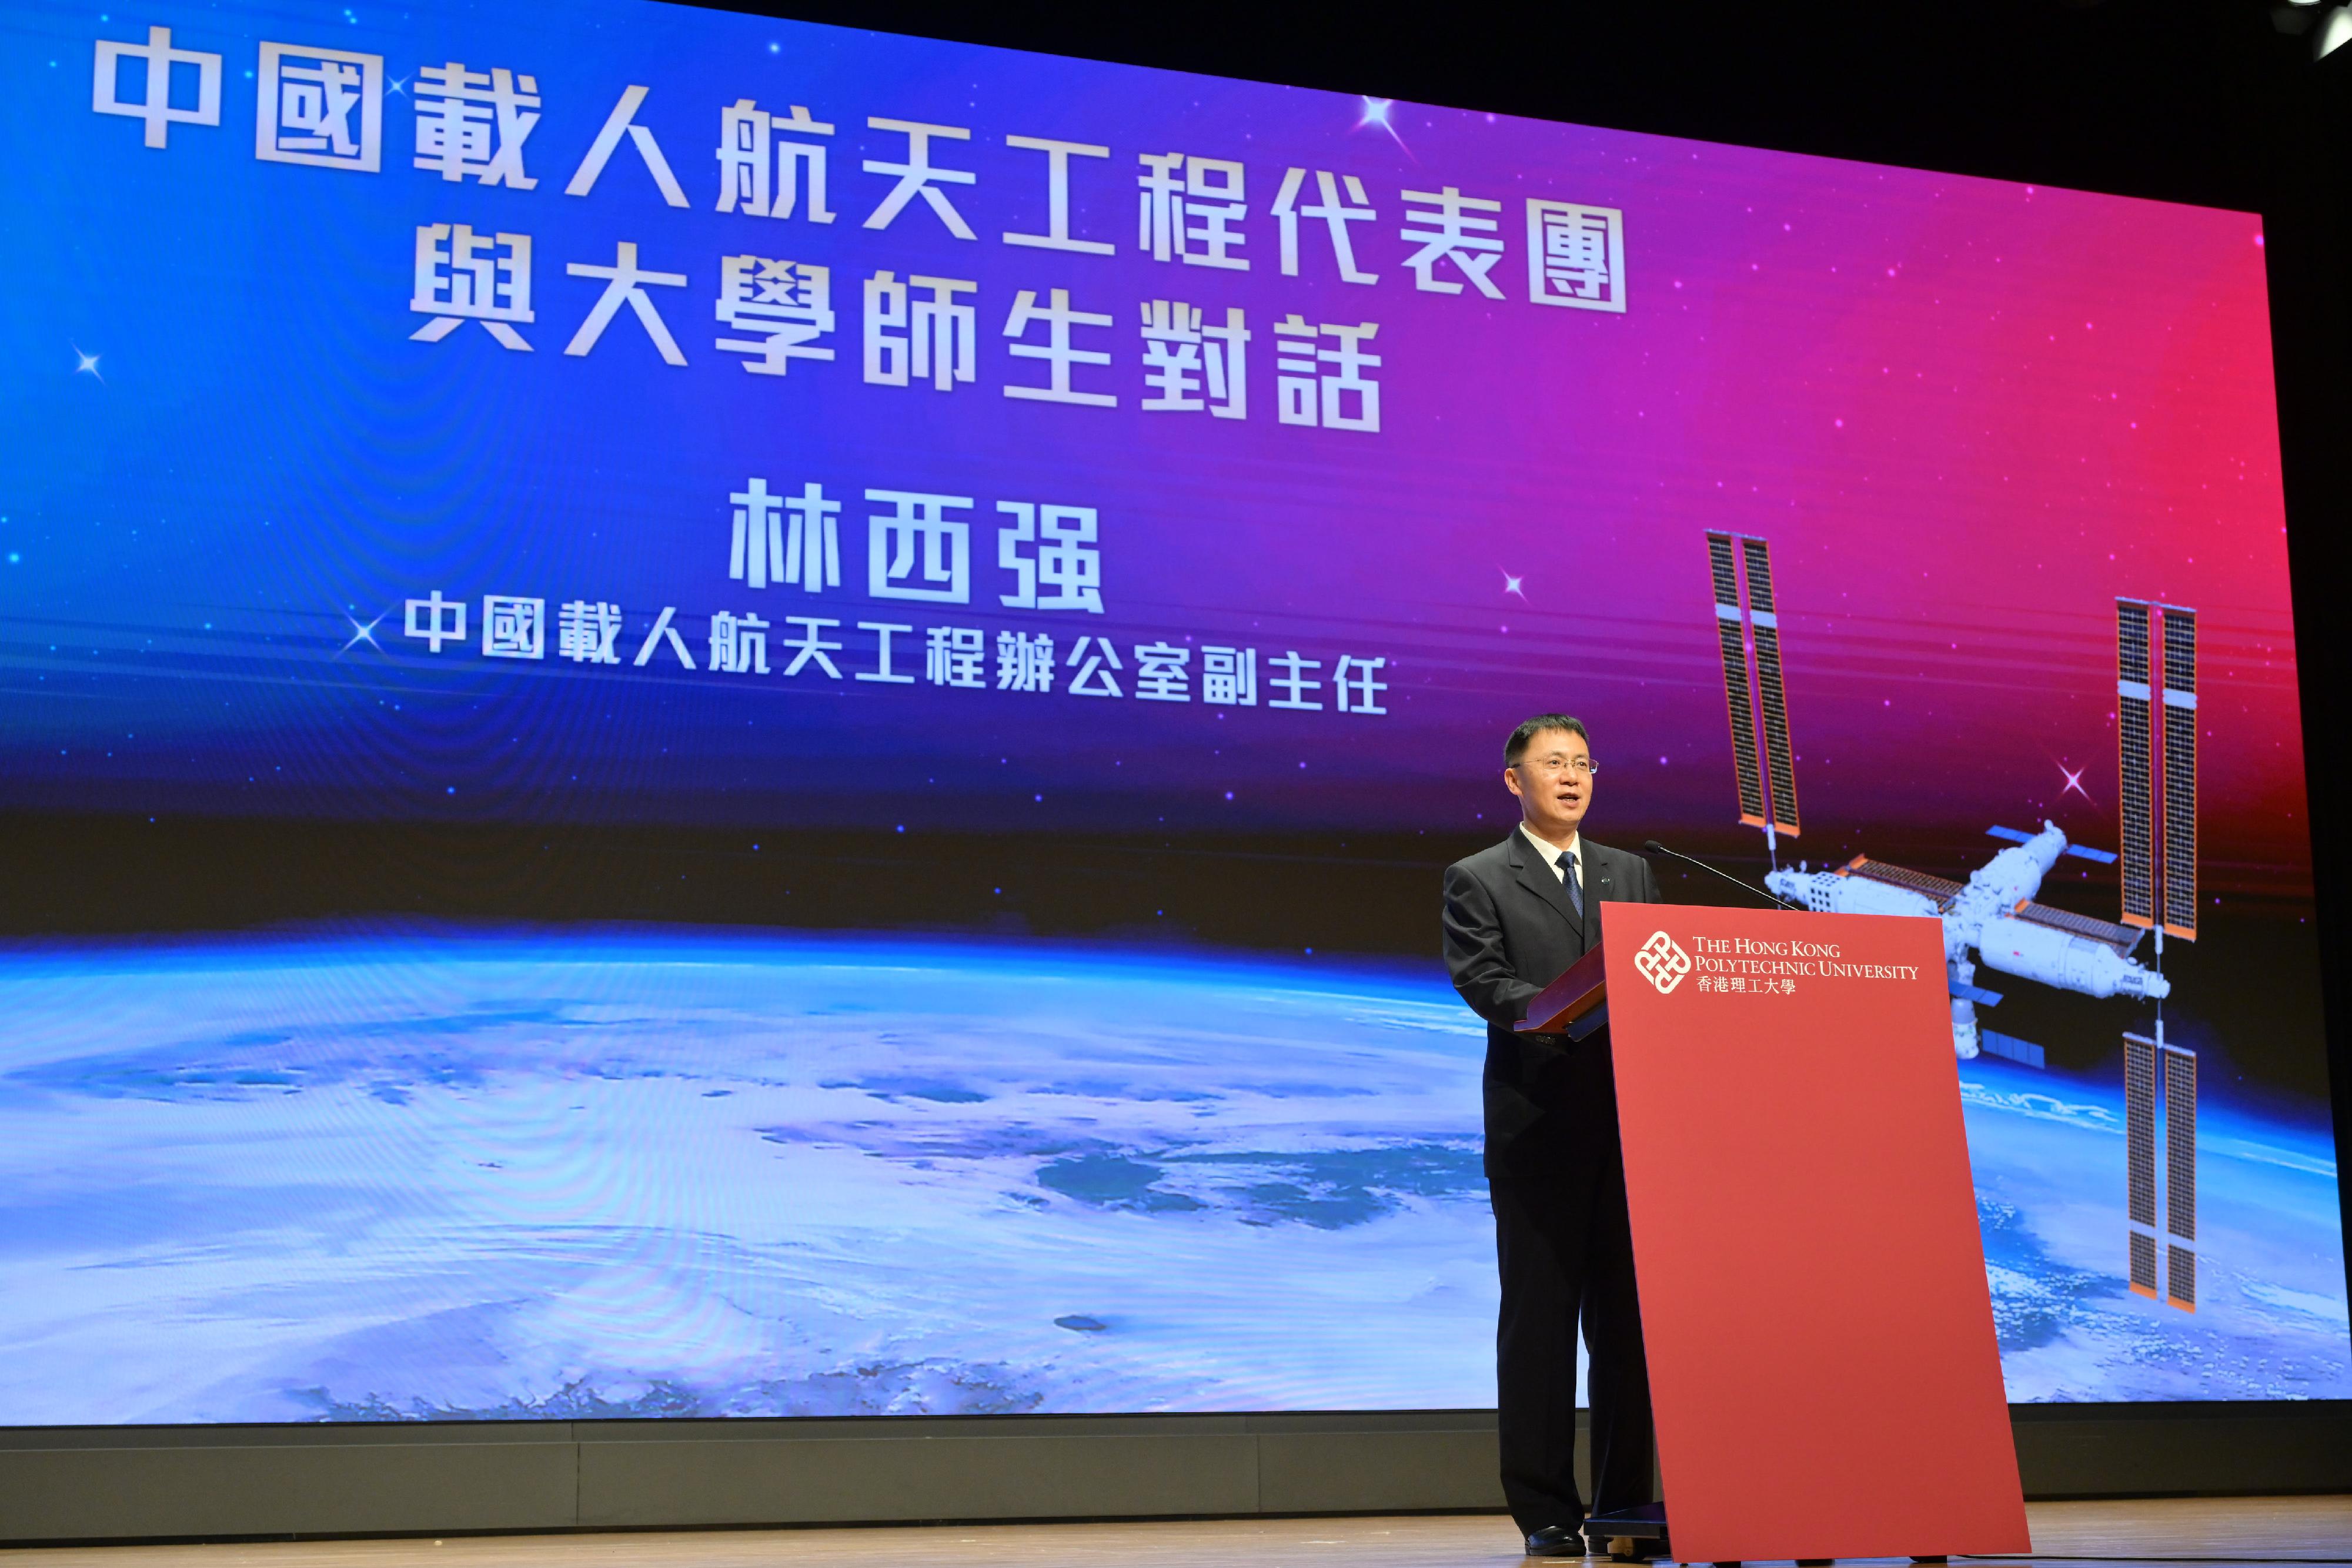 The China Manned Space delegation continued their visit to Hong Kong today (November 30). Photo shows the leader of the delegation and Deputy Director General of the China Manned Space Agency, Mr Lin Xiqiang, attending the dialogue session with teachers and students held at the Hong Kong Polytechnic University.